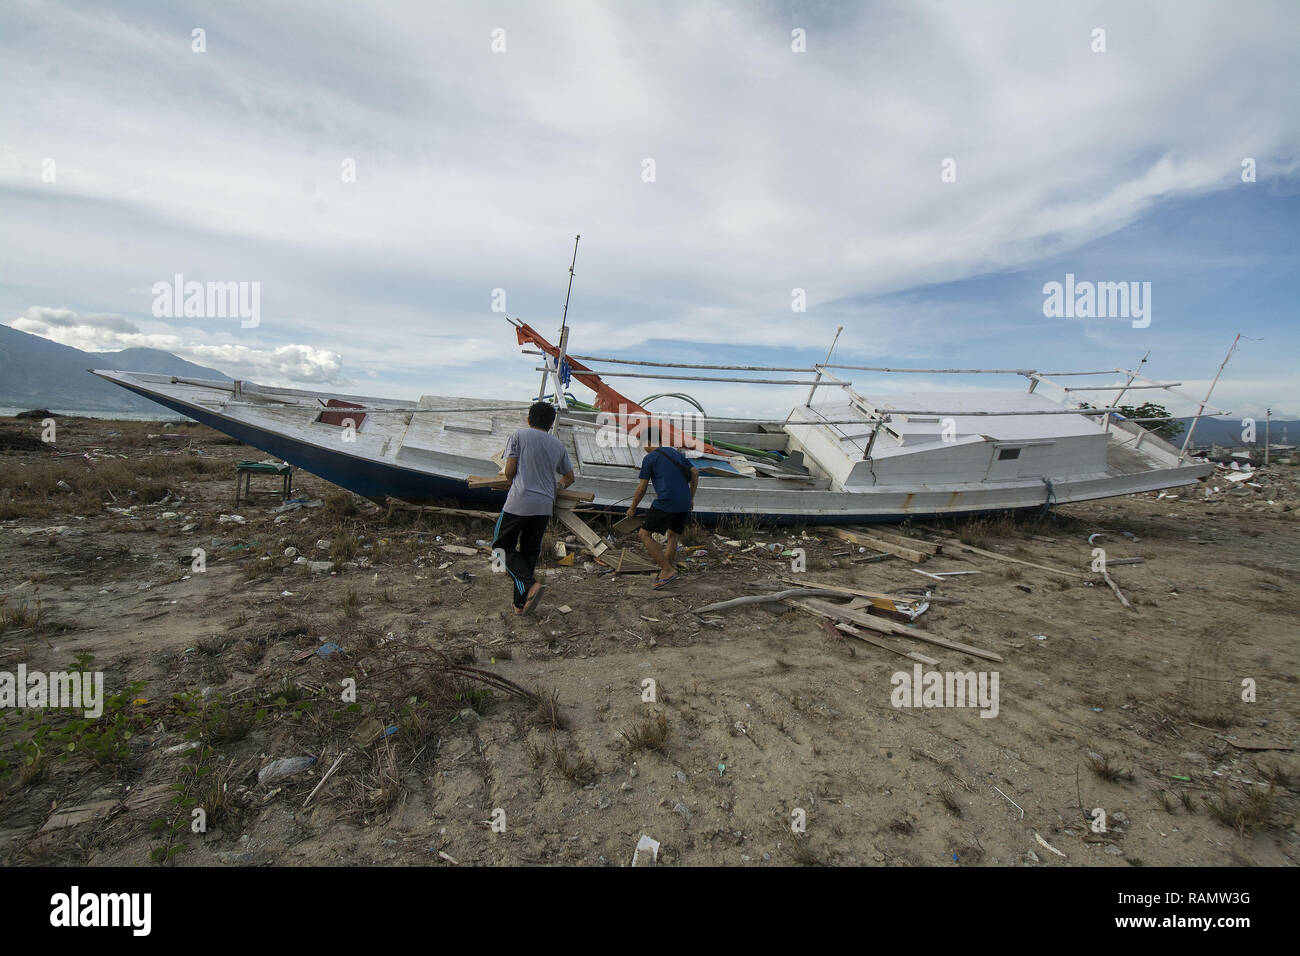 Palu, Indonesia. 04th Jan, 2019. Residents pick up the rest of the wood in the former location of the tsunami brunt on Talise Beach, Palu Bay, Central Sulawesi, Indonesia, Friday (01/04/2019). Until more than three months after the tsunami, a number of previously trapped areas have not been cleared due to limited equipment. The tsunami that struck on September 28 2018 resulted in more than 2,000 people being killed and more than 70,000 displaced. Credit: bmzIMAGES/Alamy Live News Stock Photo